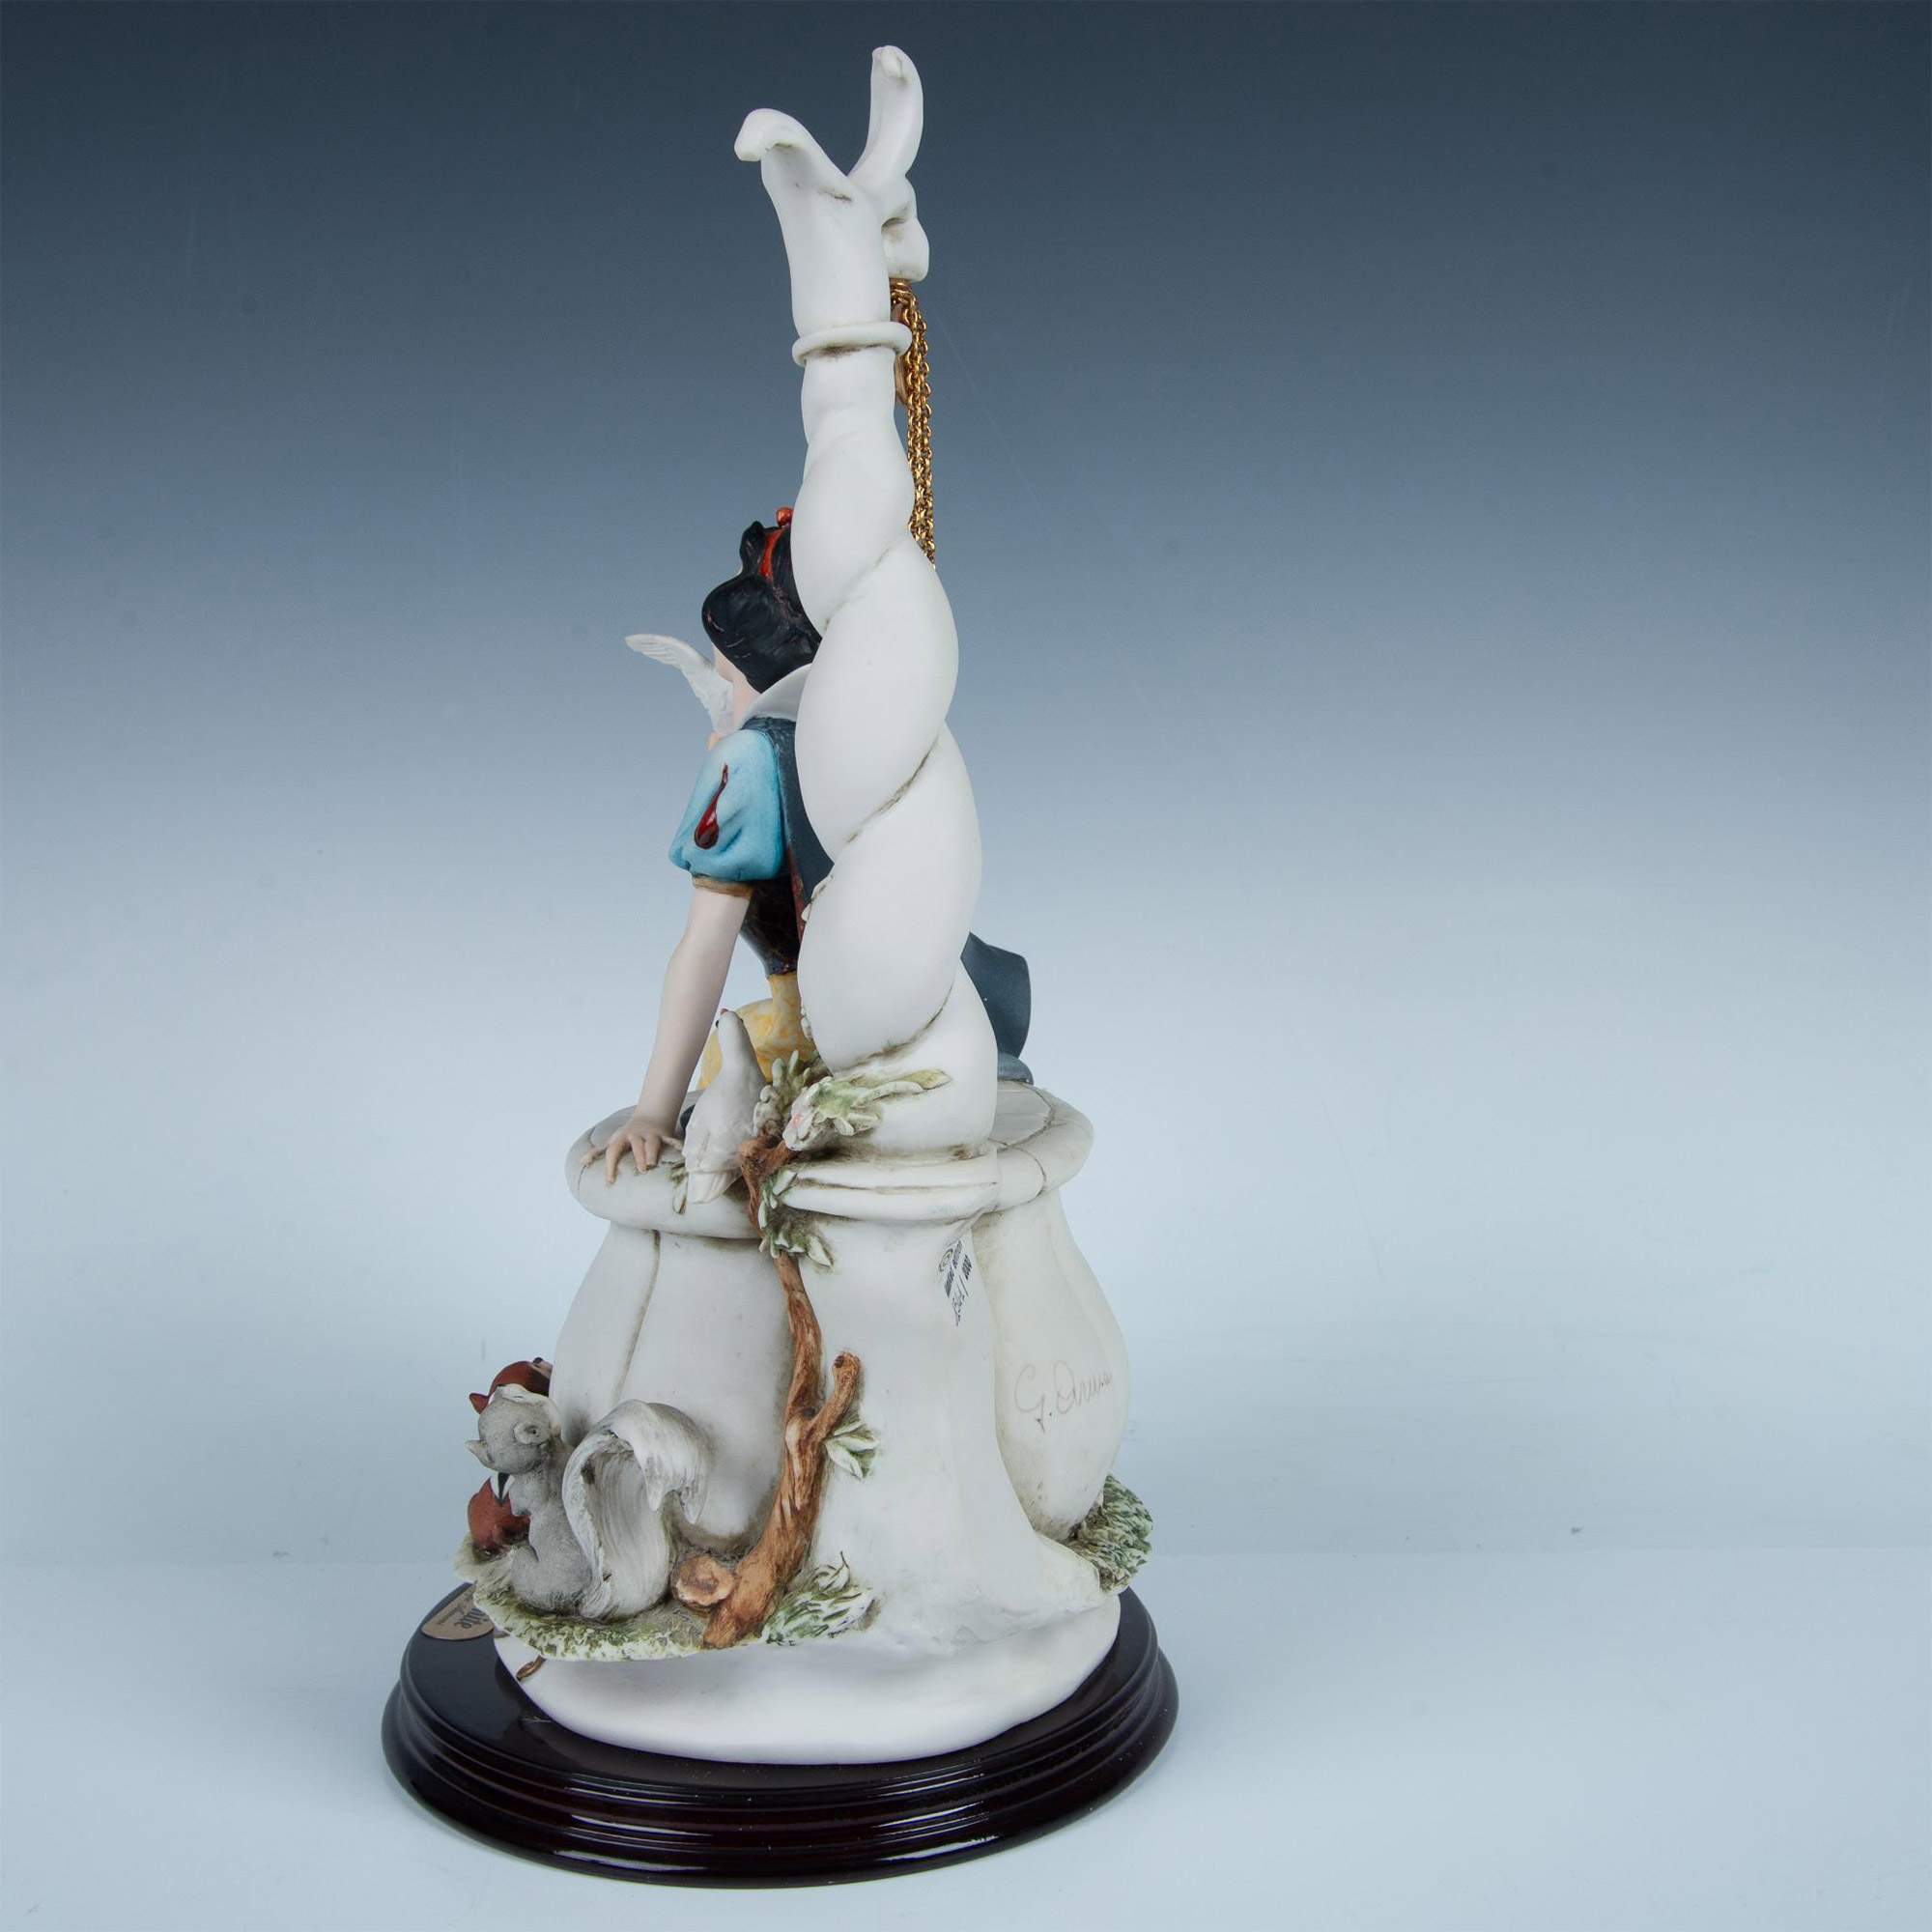 Florence by Giuseppe Armani for Disney Figurine, Snow White - Image 12 of 13